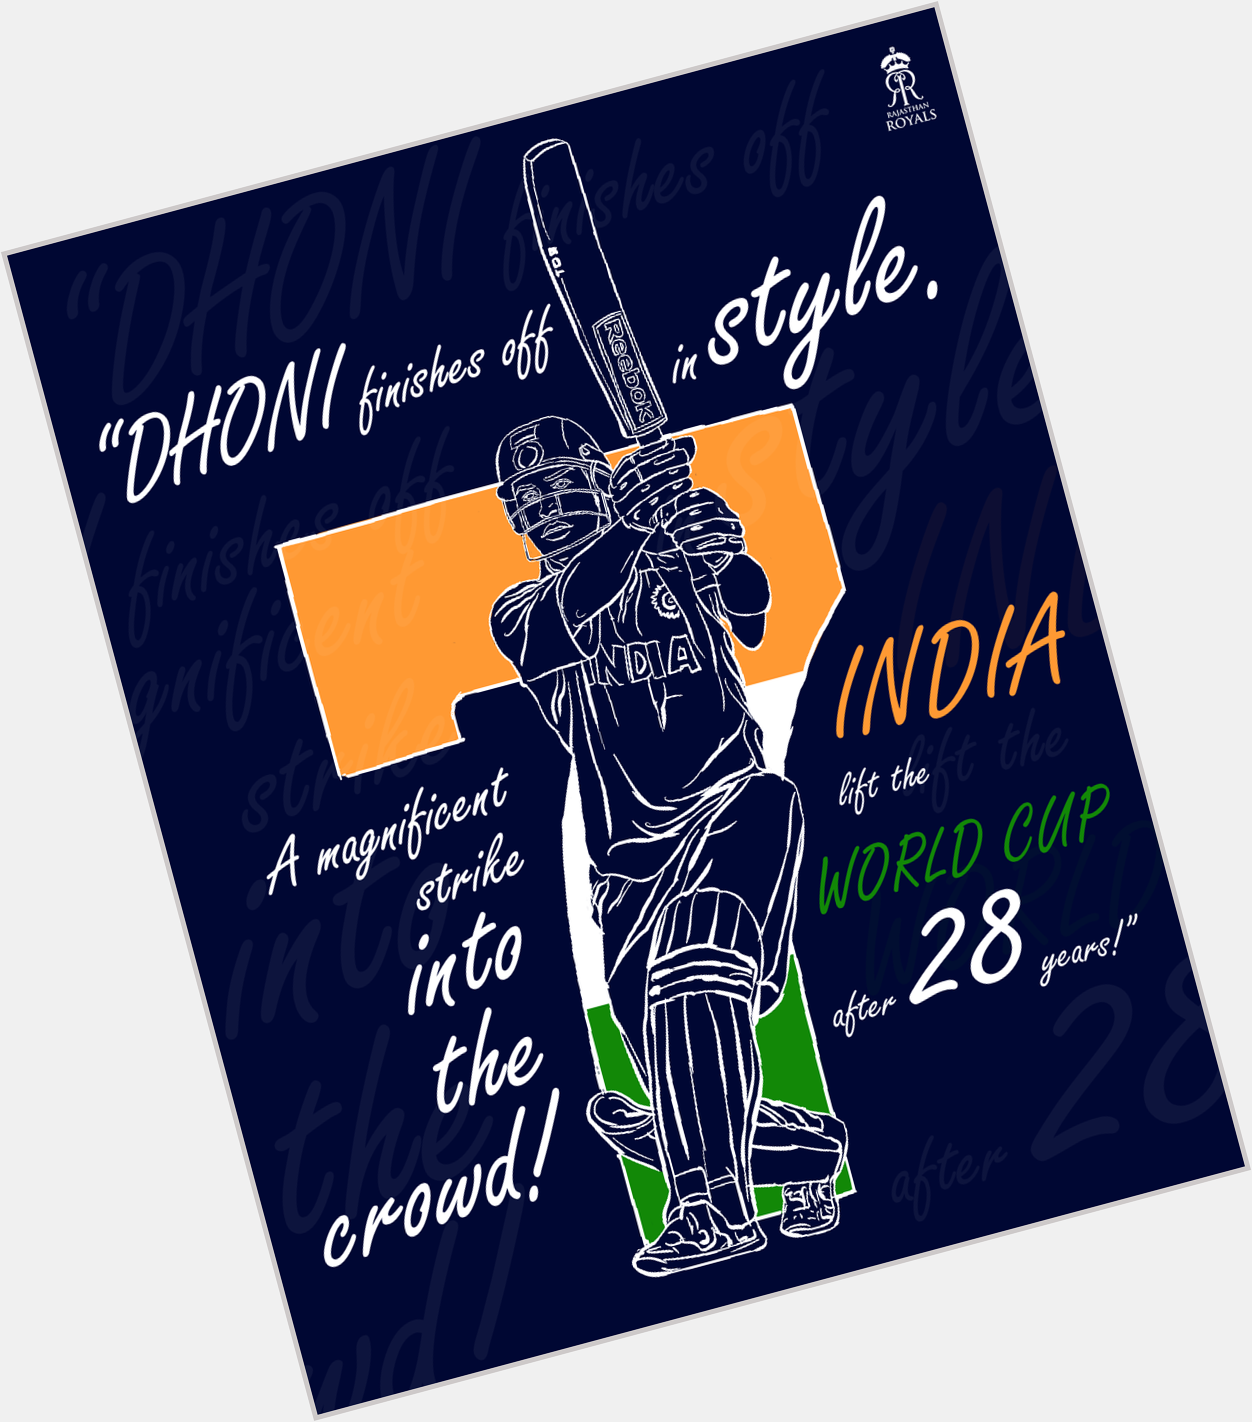 Thank you for fulfilling the dream of a billion Indians.  Happy birthday, Mahendra Singh Dhoni.  